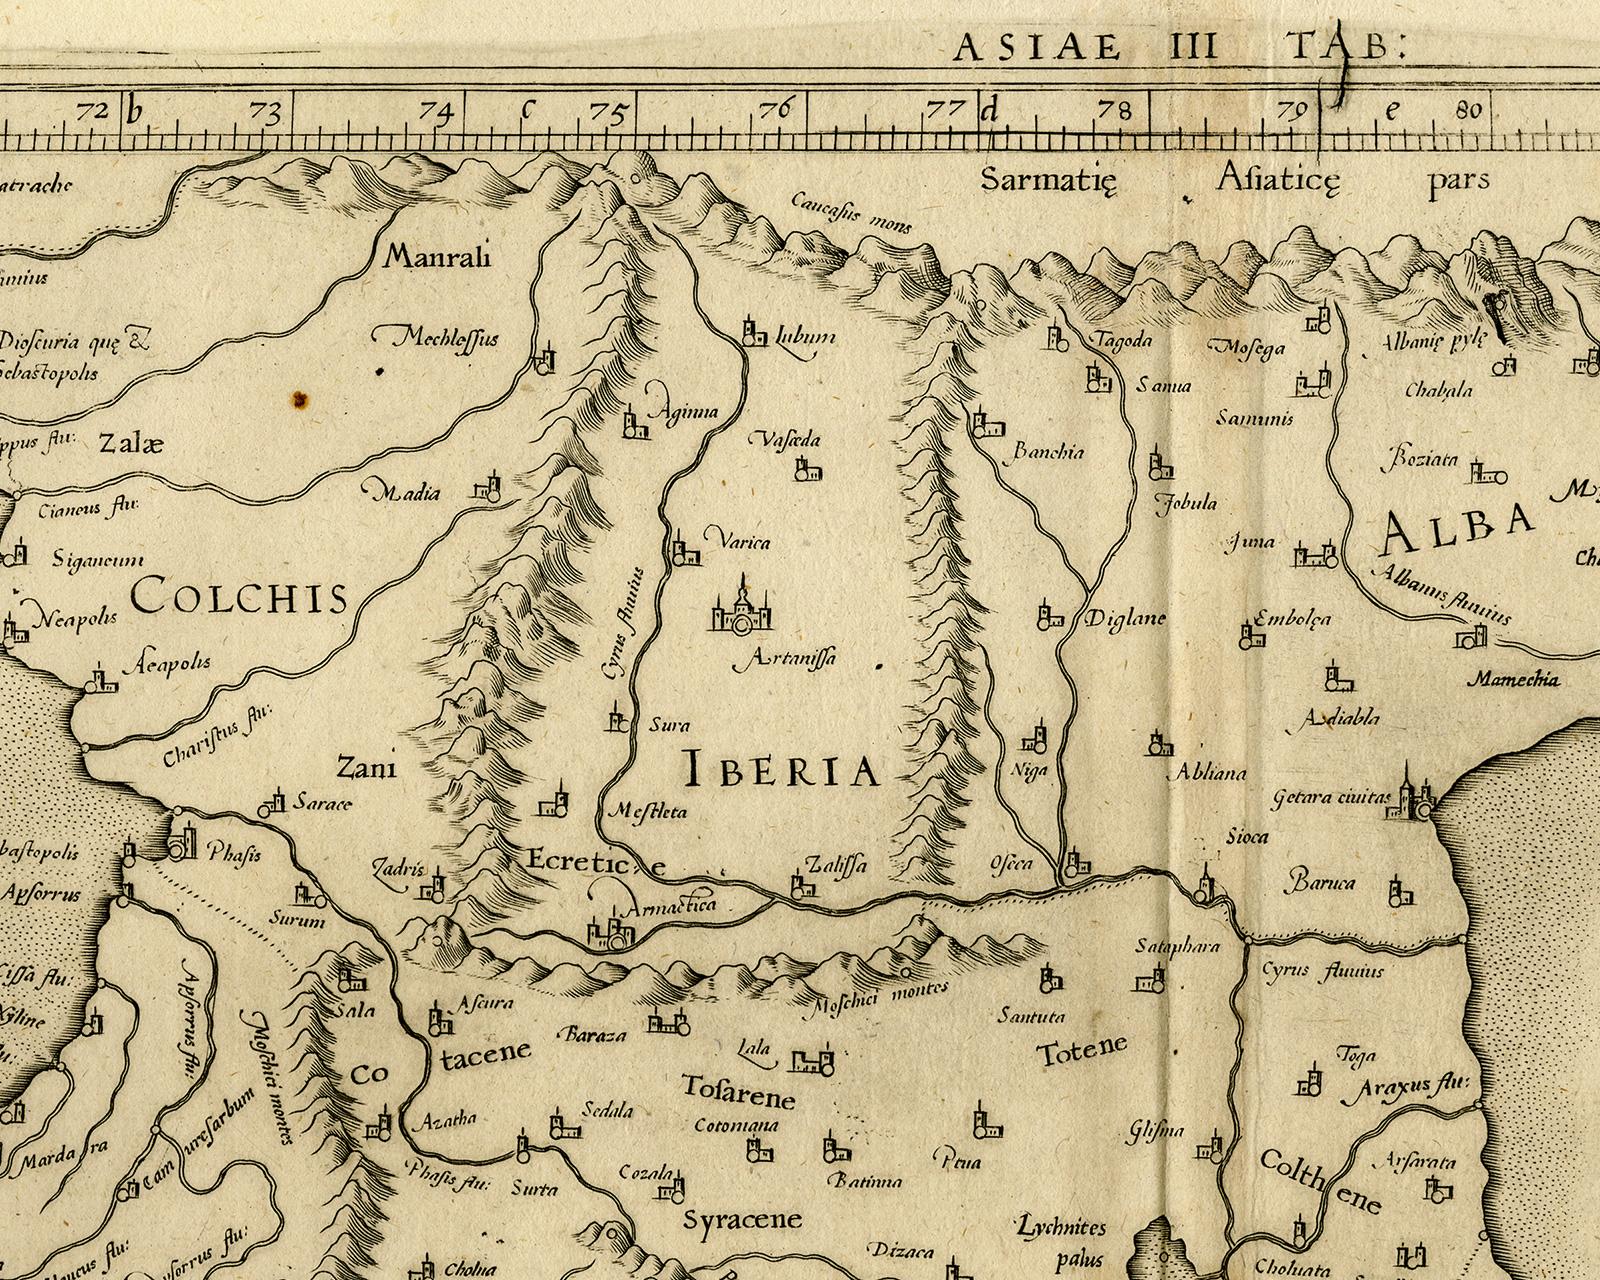 Old map of Georgia, Armenia and Azerbaijan by Mercator - Engraving - 17th c. For Sale 1